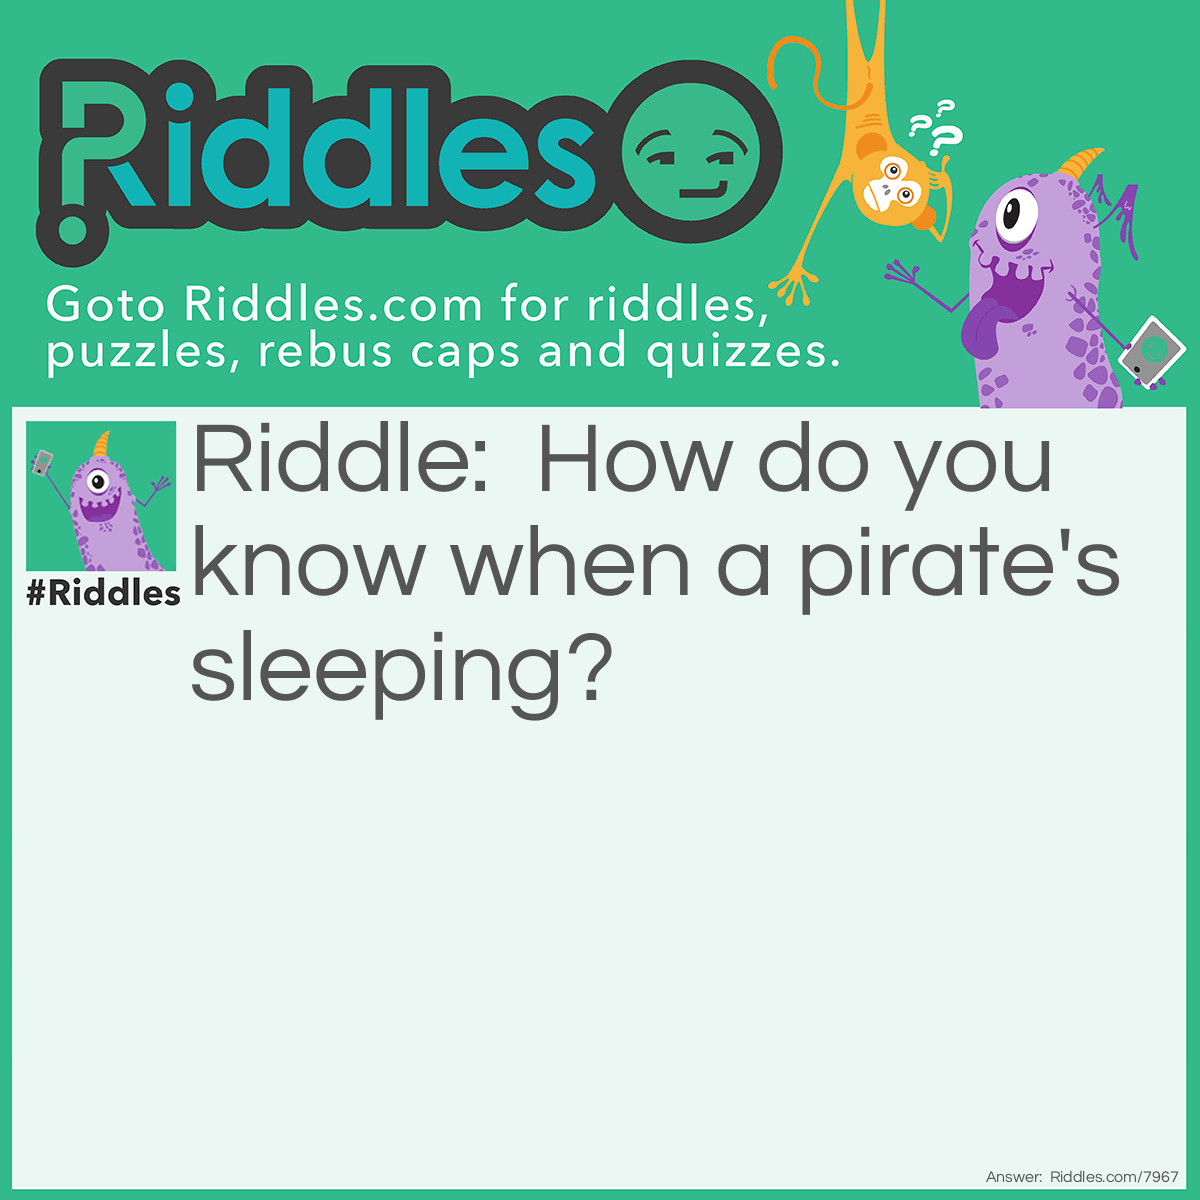 Riddle: How do you know when a pirate's sleeping? Answer: When he sounds like 50 Pigs.